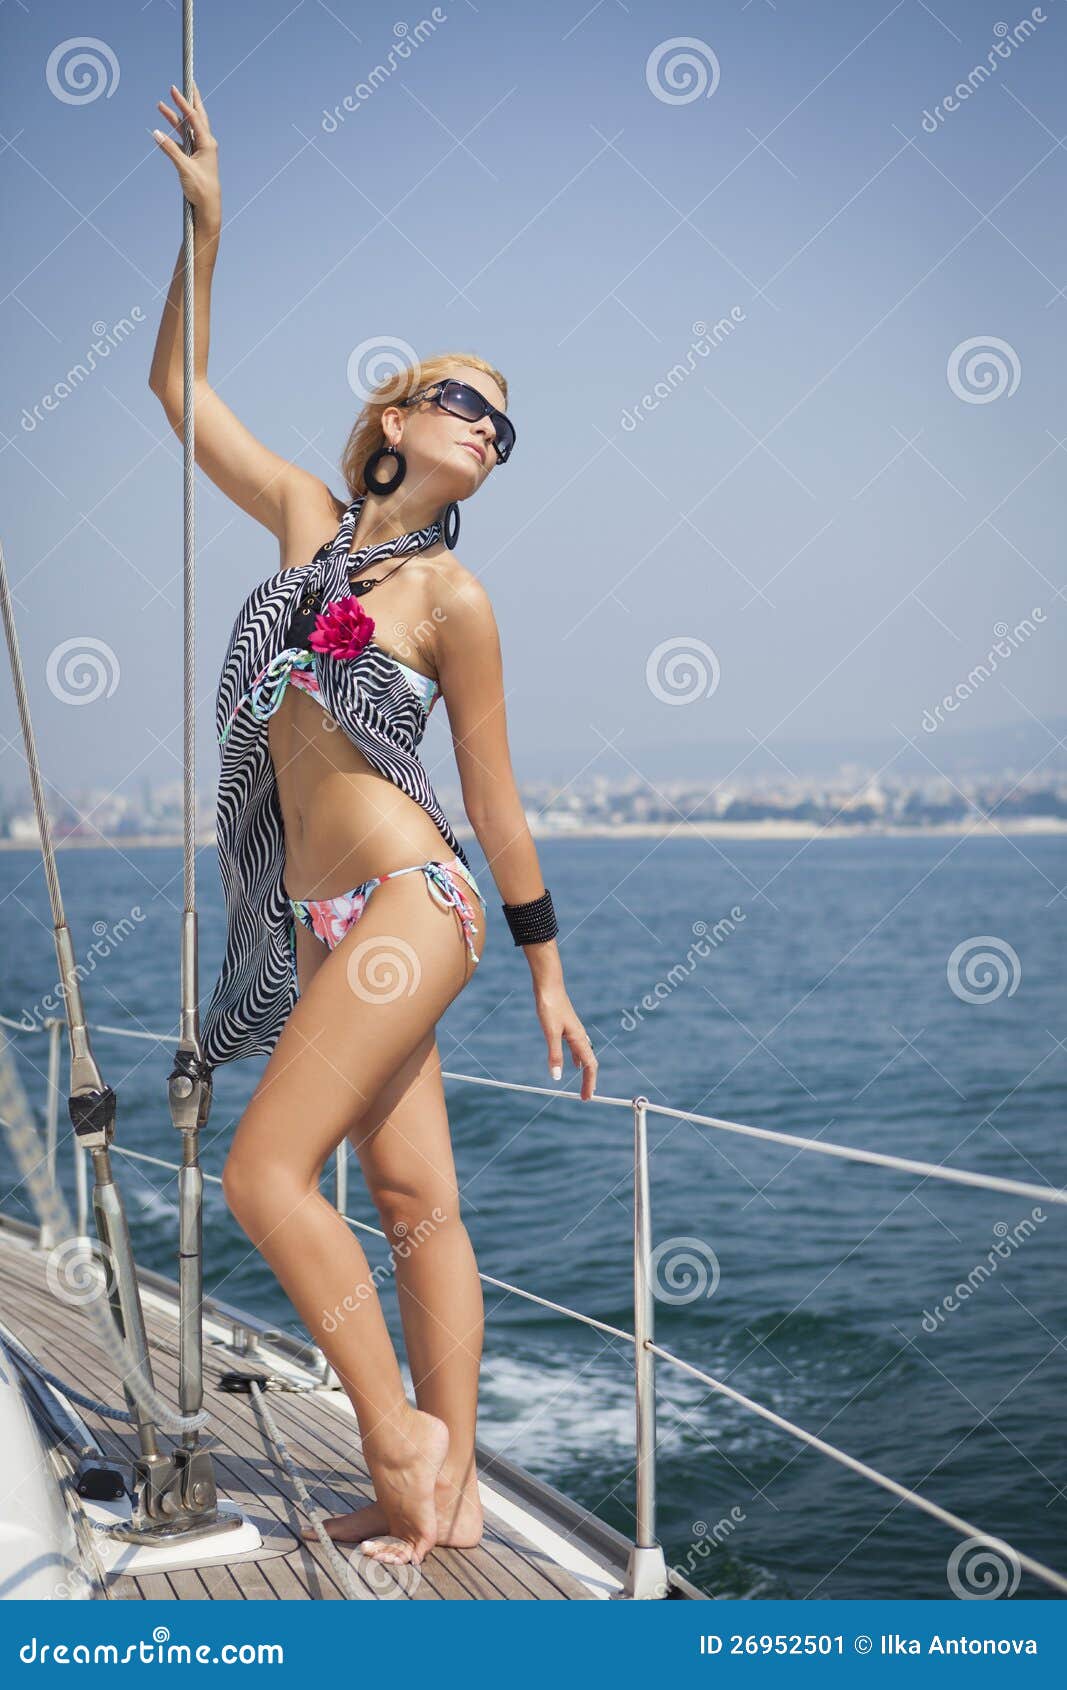 beautiful woman on a boat royalty free stock photos